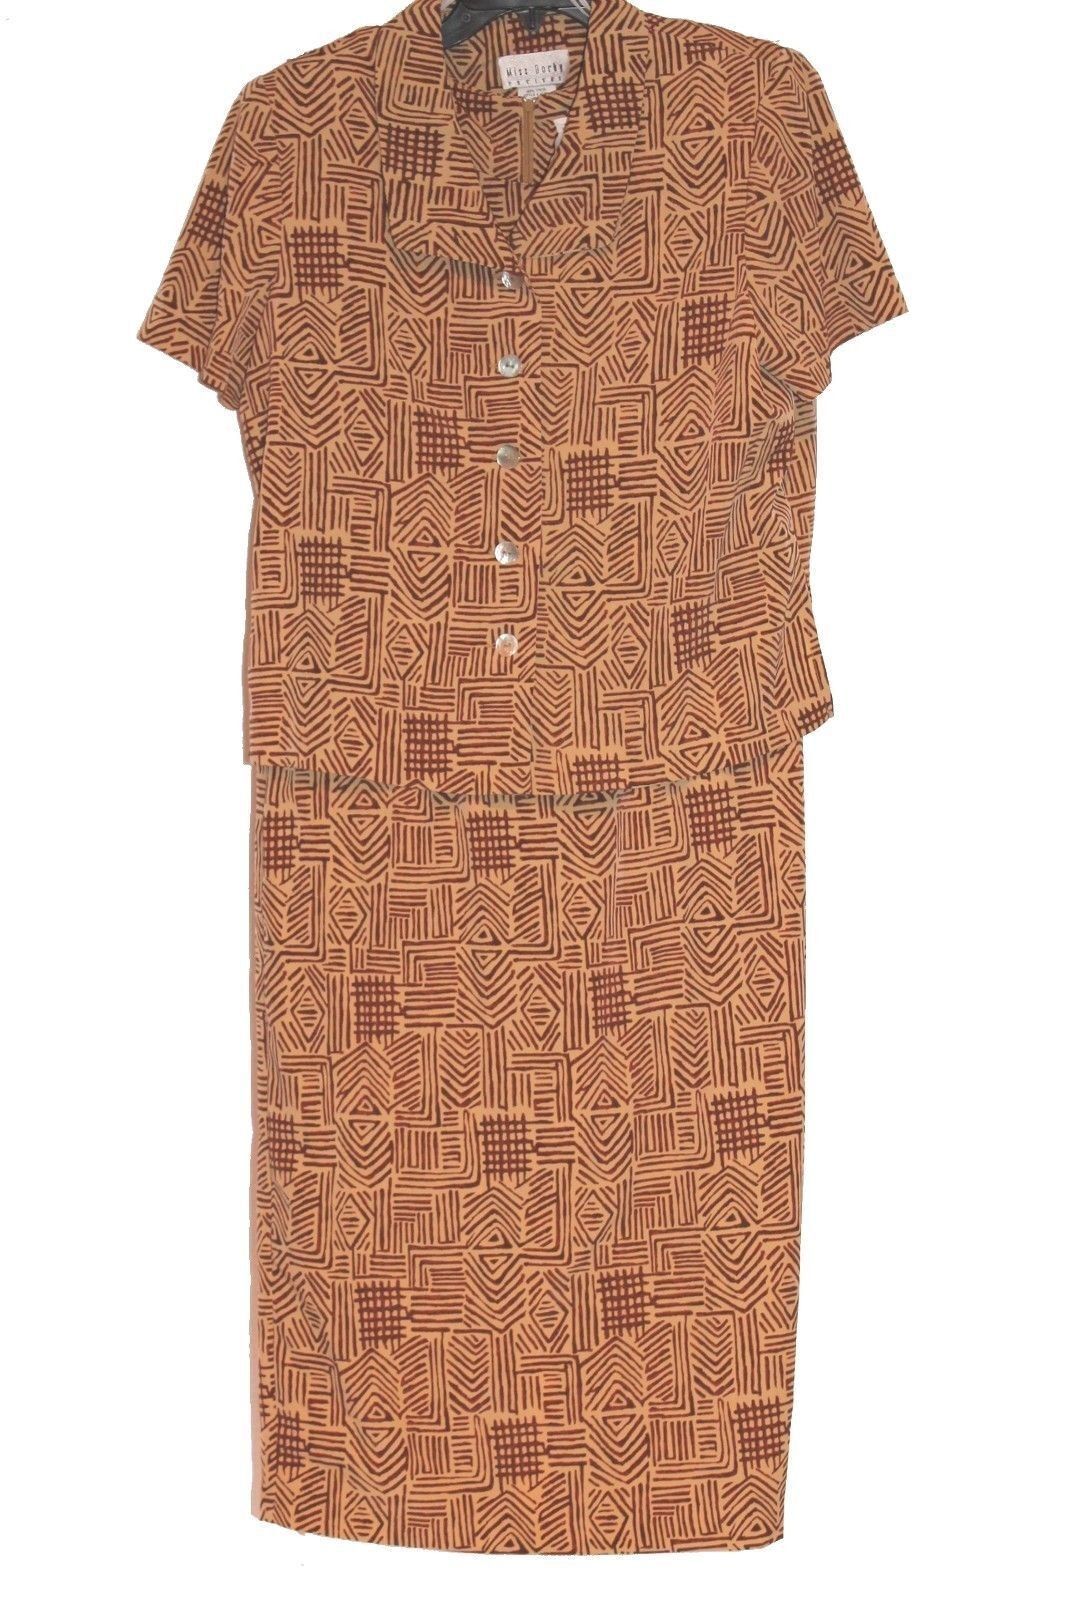 Primary image for Miss Dorby Petites Career Blouse Skirt Dress Set Brown Geometric Designs 12P 12 